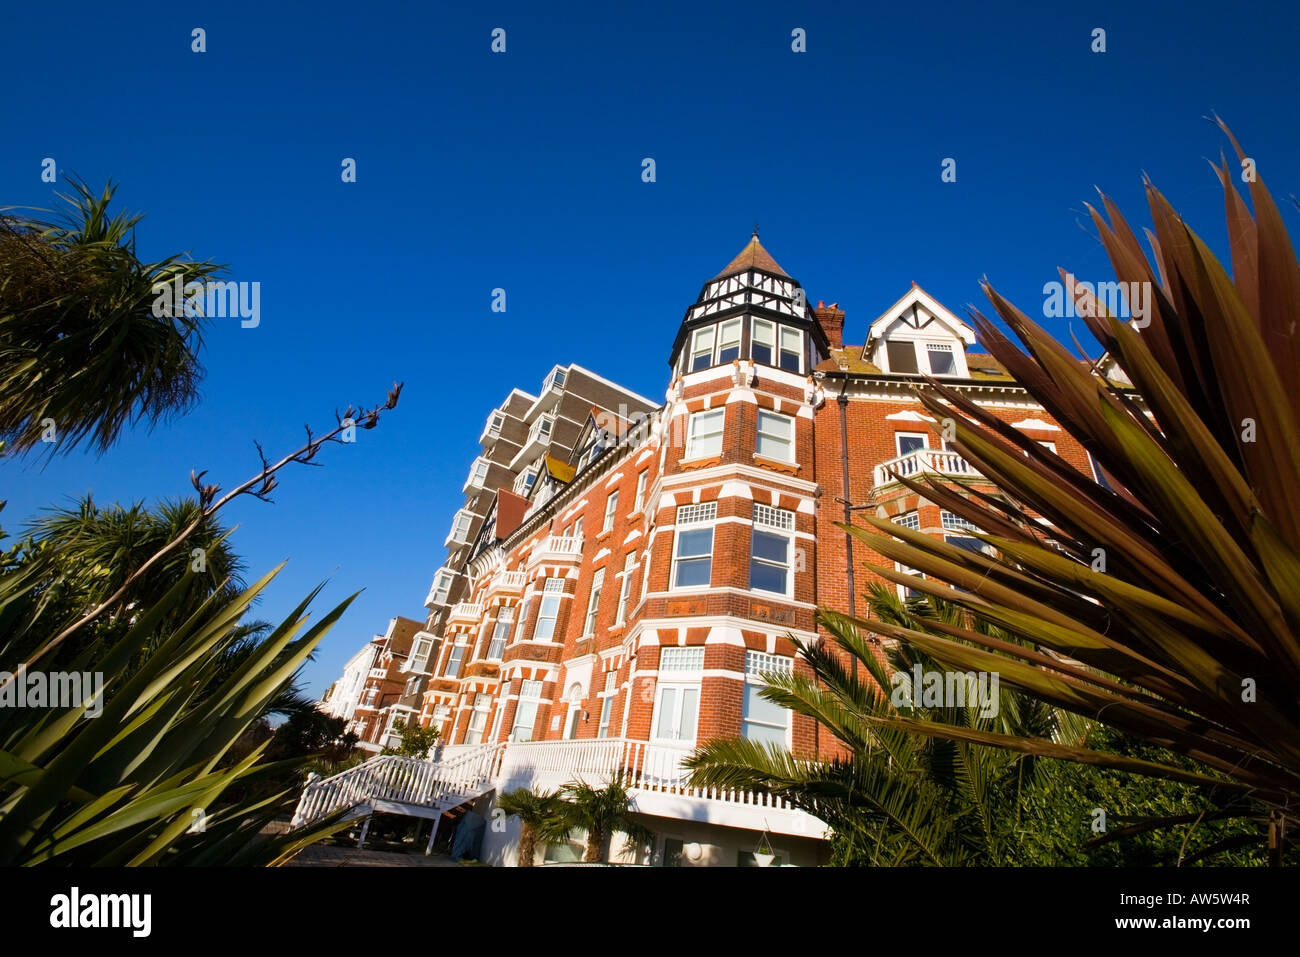 An old building in Southsea, Portsmouth, Hampshire, England, UK Stock Photo